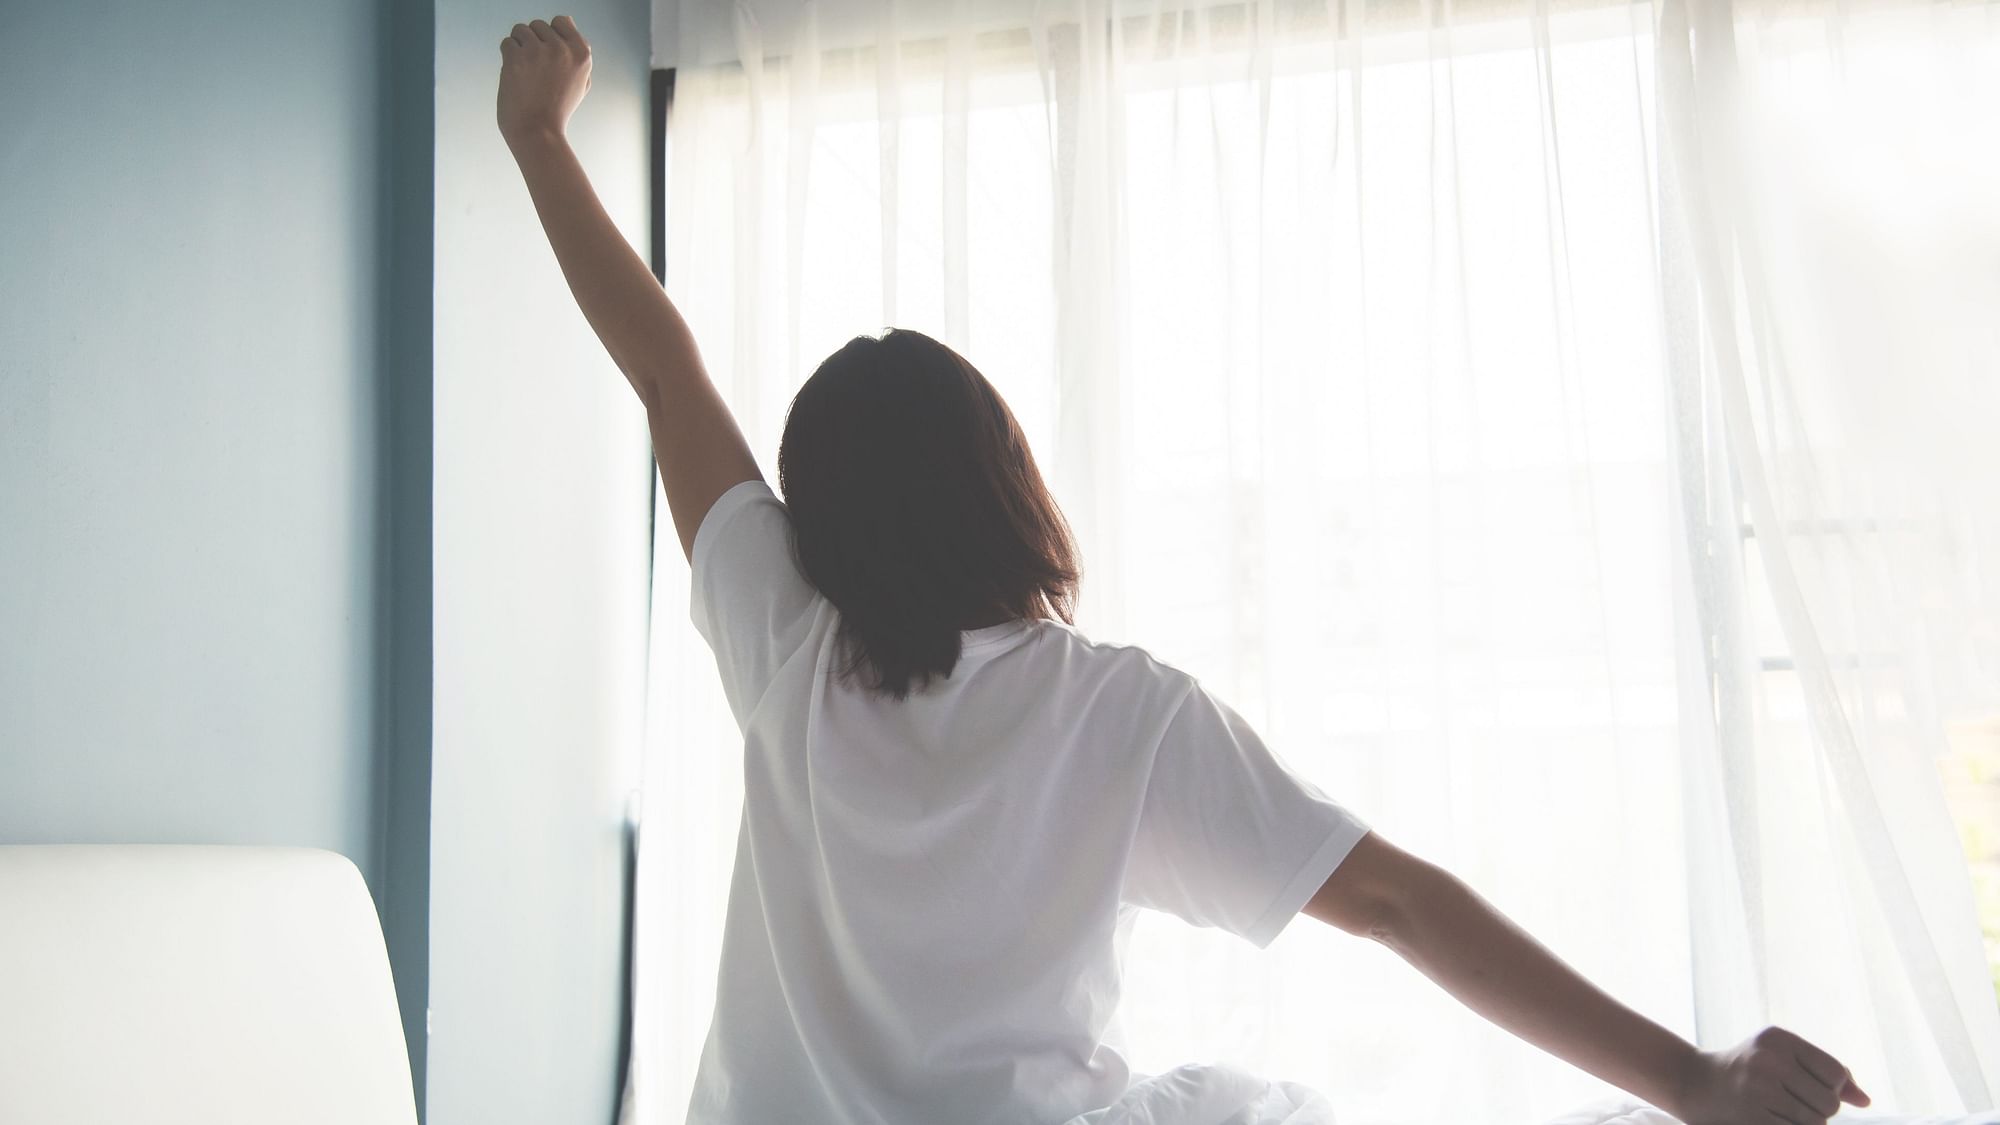 Scientists believe that waking up should be a natural act and not artificially induced. Here's how waking up early can help you.